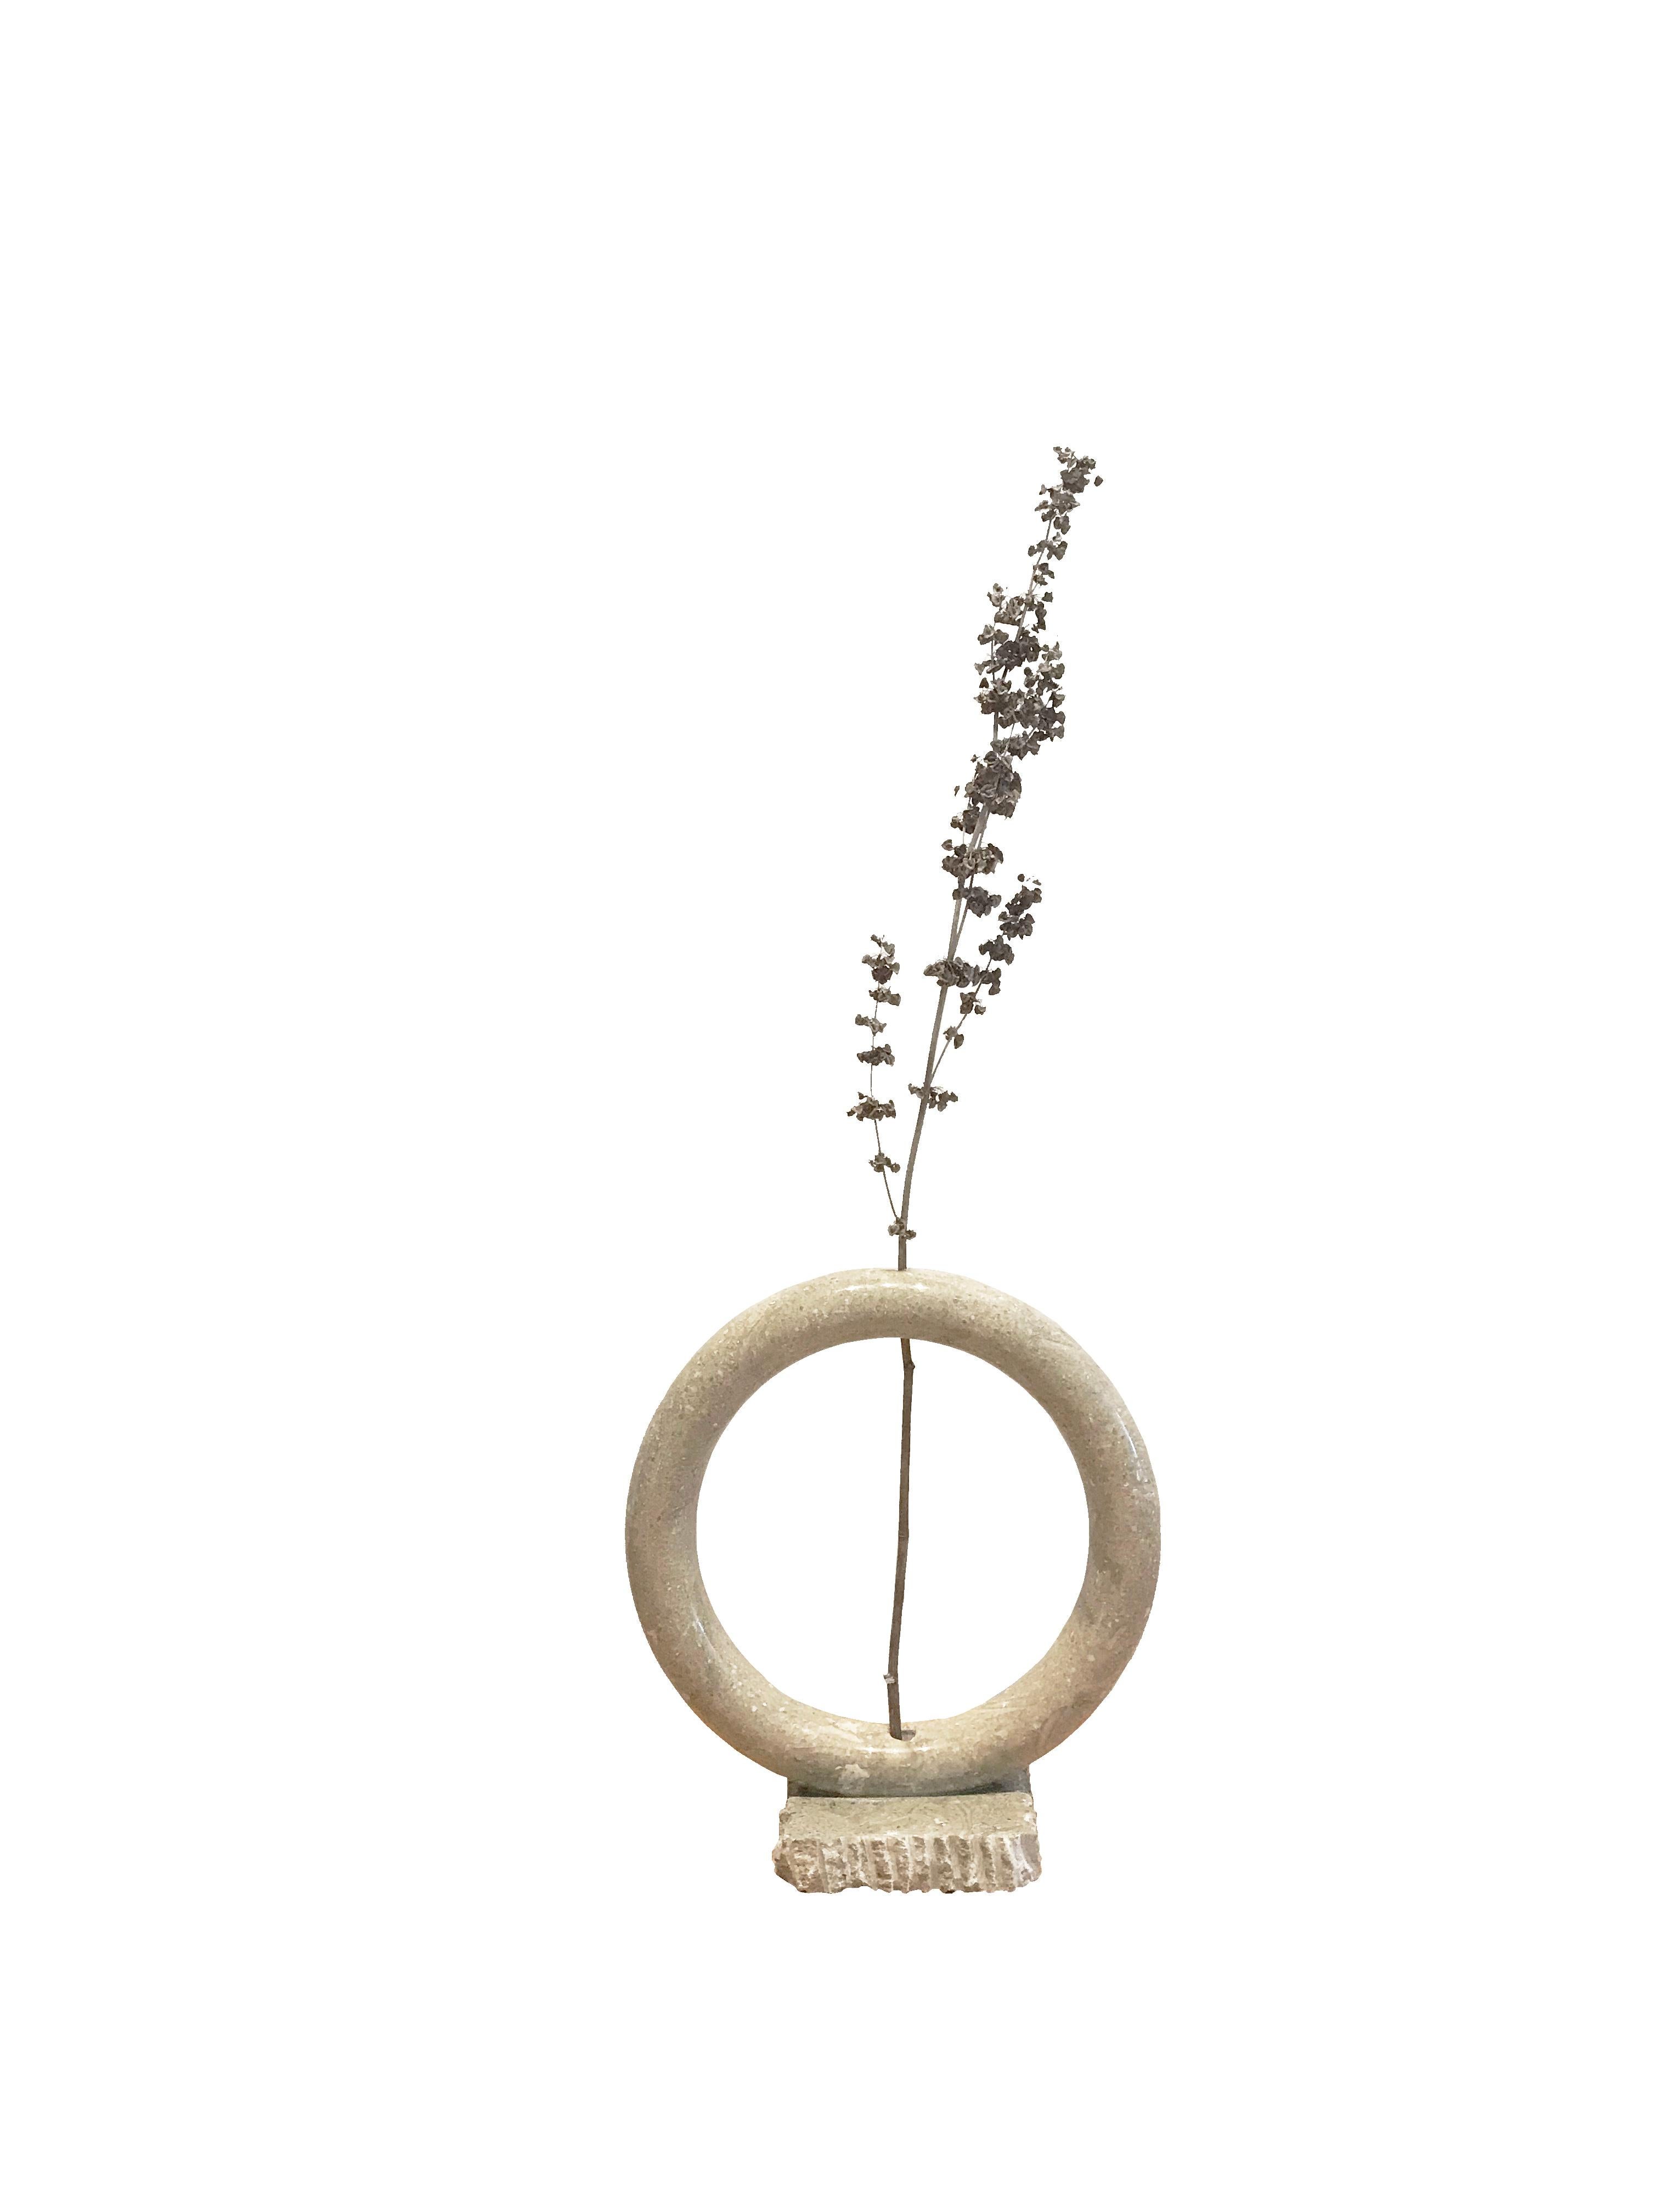 Mon Vase by Studio Laf
Dimensions: W20 cm x H21 cm
Materials: Marble.


Mon Vase emerged with the idea of reuniting natural stone with nature after shaping it by hand. It emphasizes the concept of balance and the wabi-sabi approach with its broken